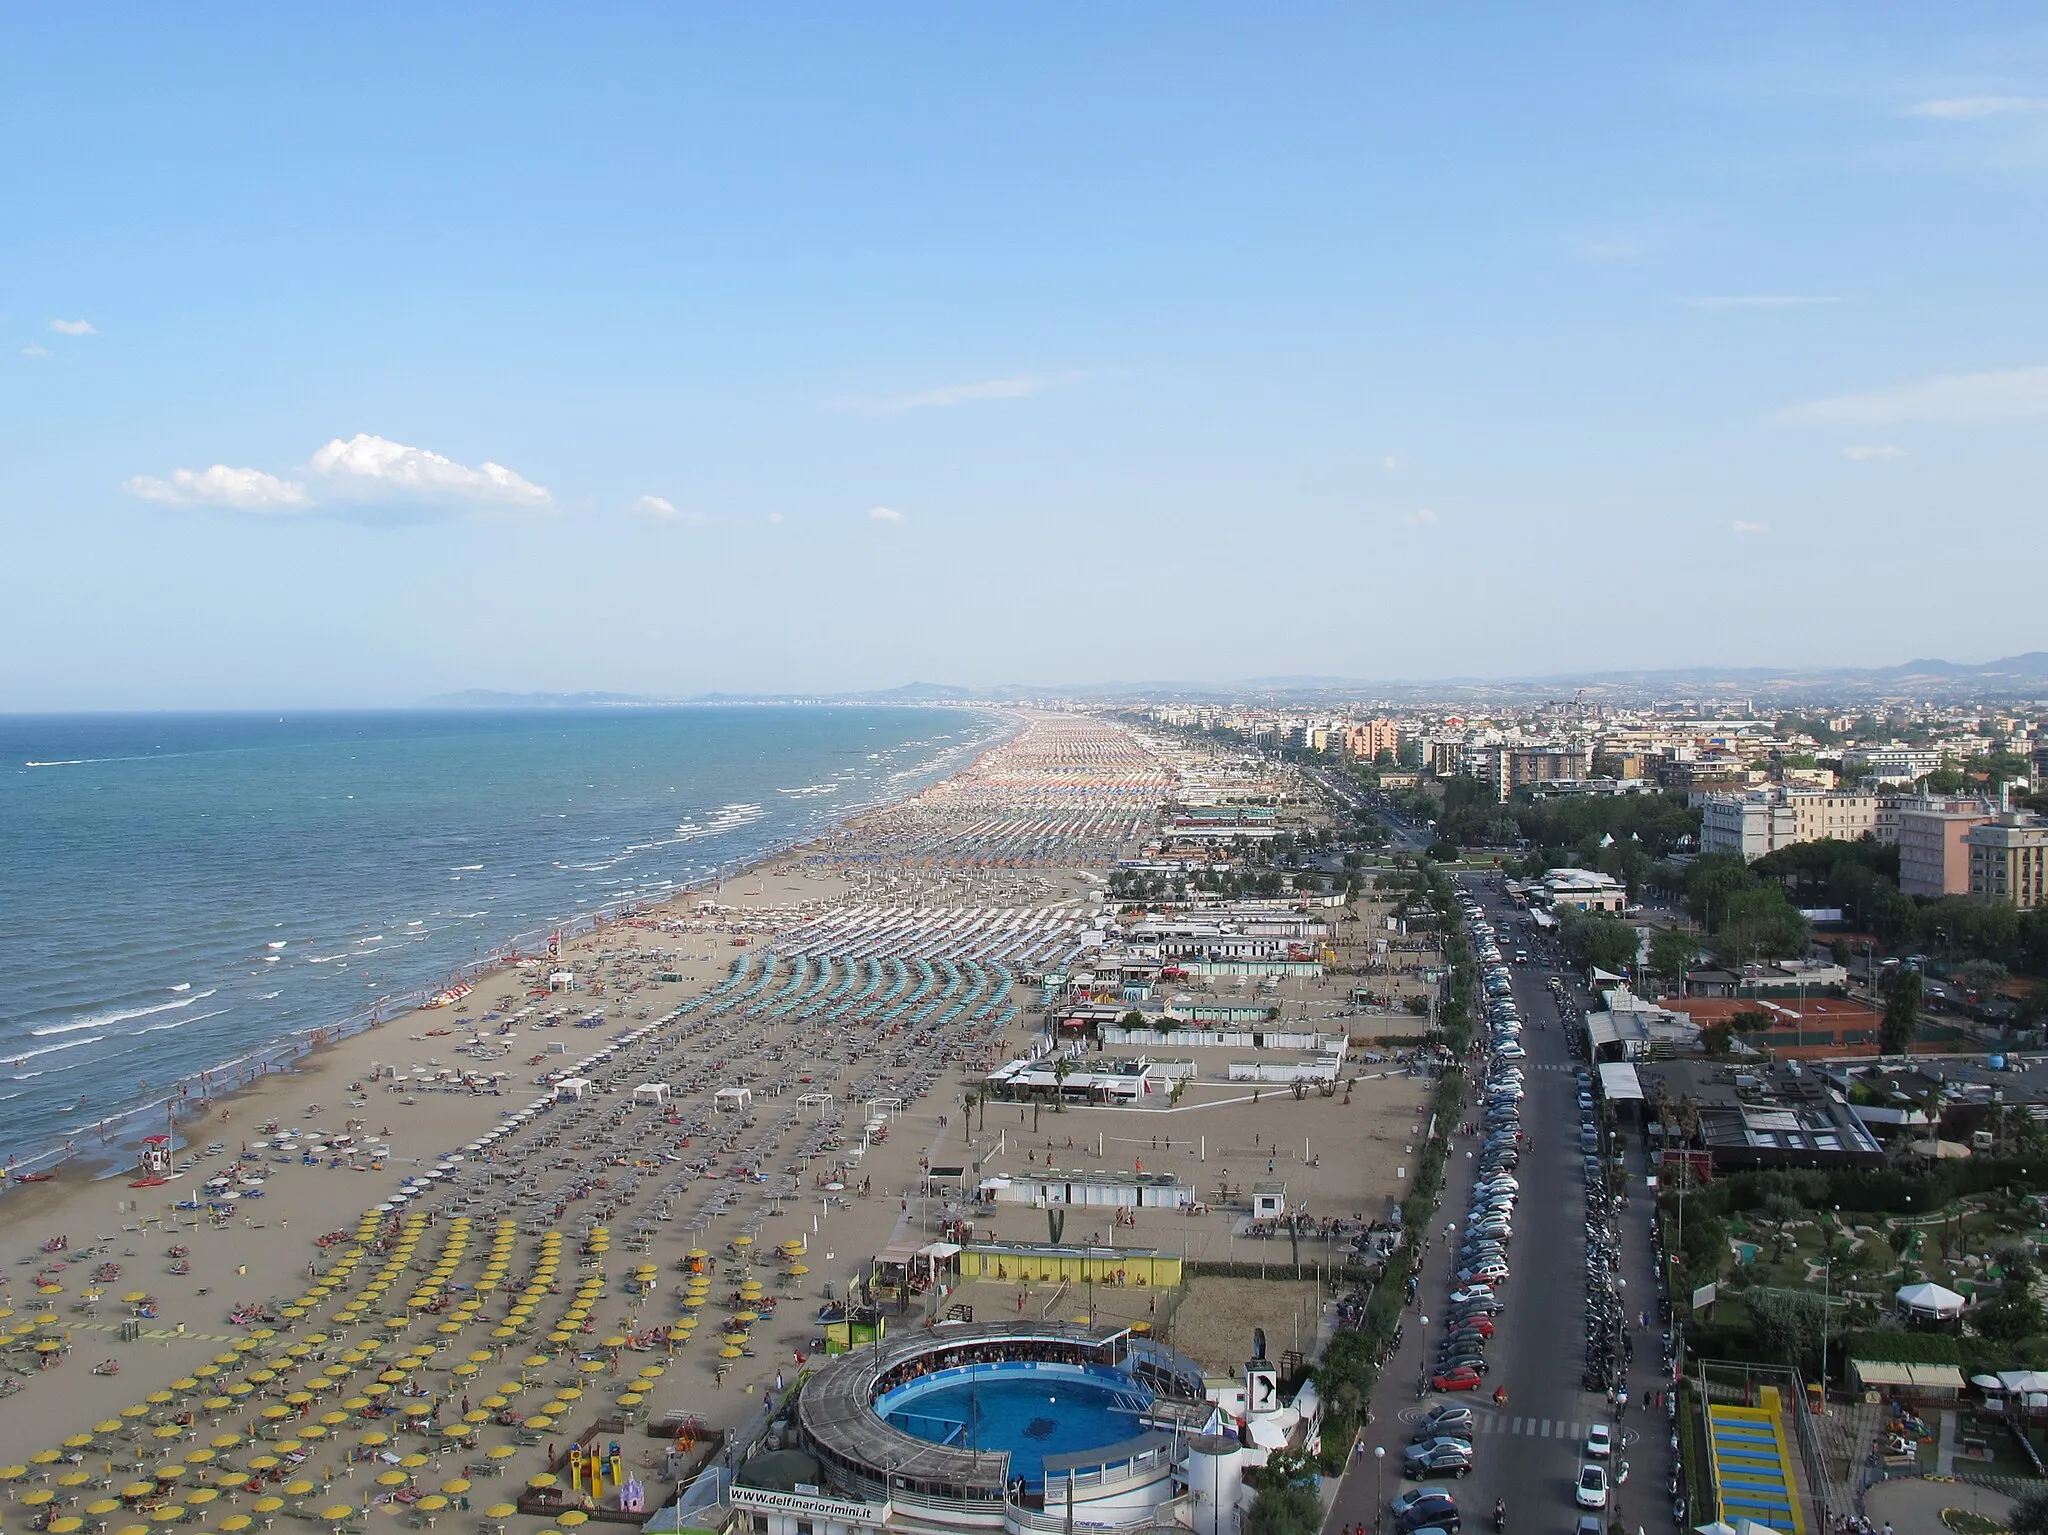 Photo showing: The beach of the city of Rimini, Italy. Photo taken from the ferris wheel on July 14, 2012.